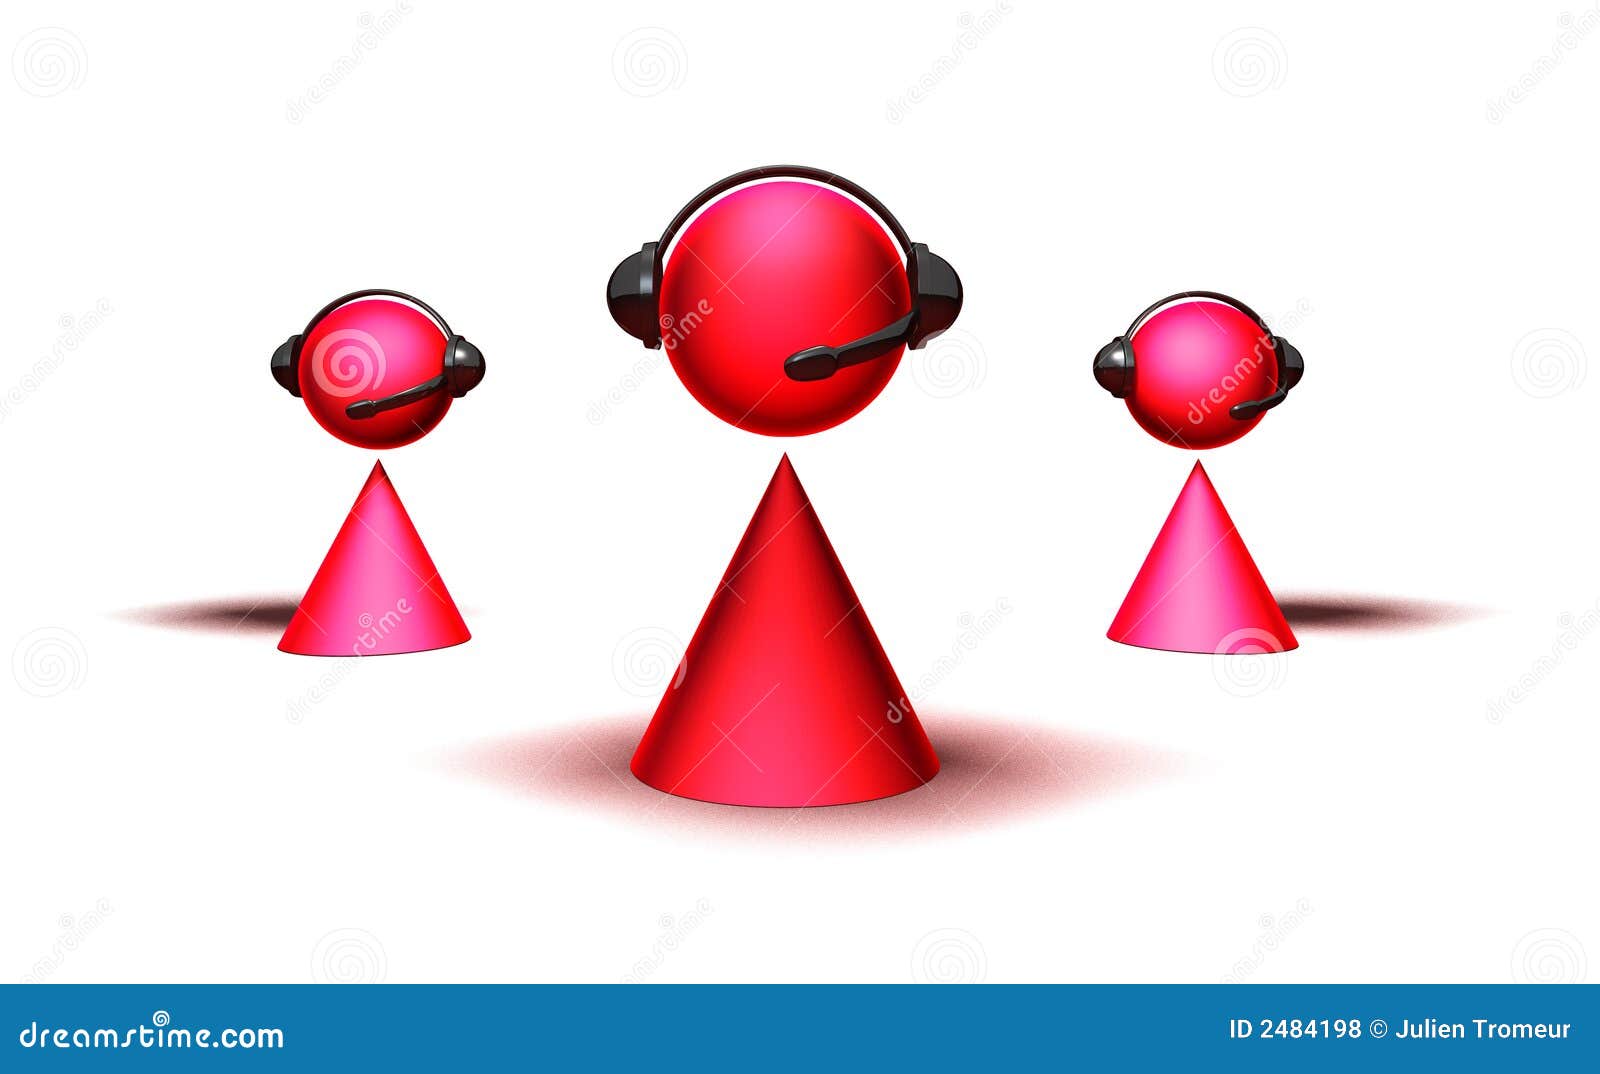 Conference Call Stock Illustration Illustration Of Technology